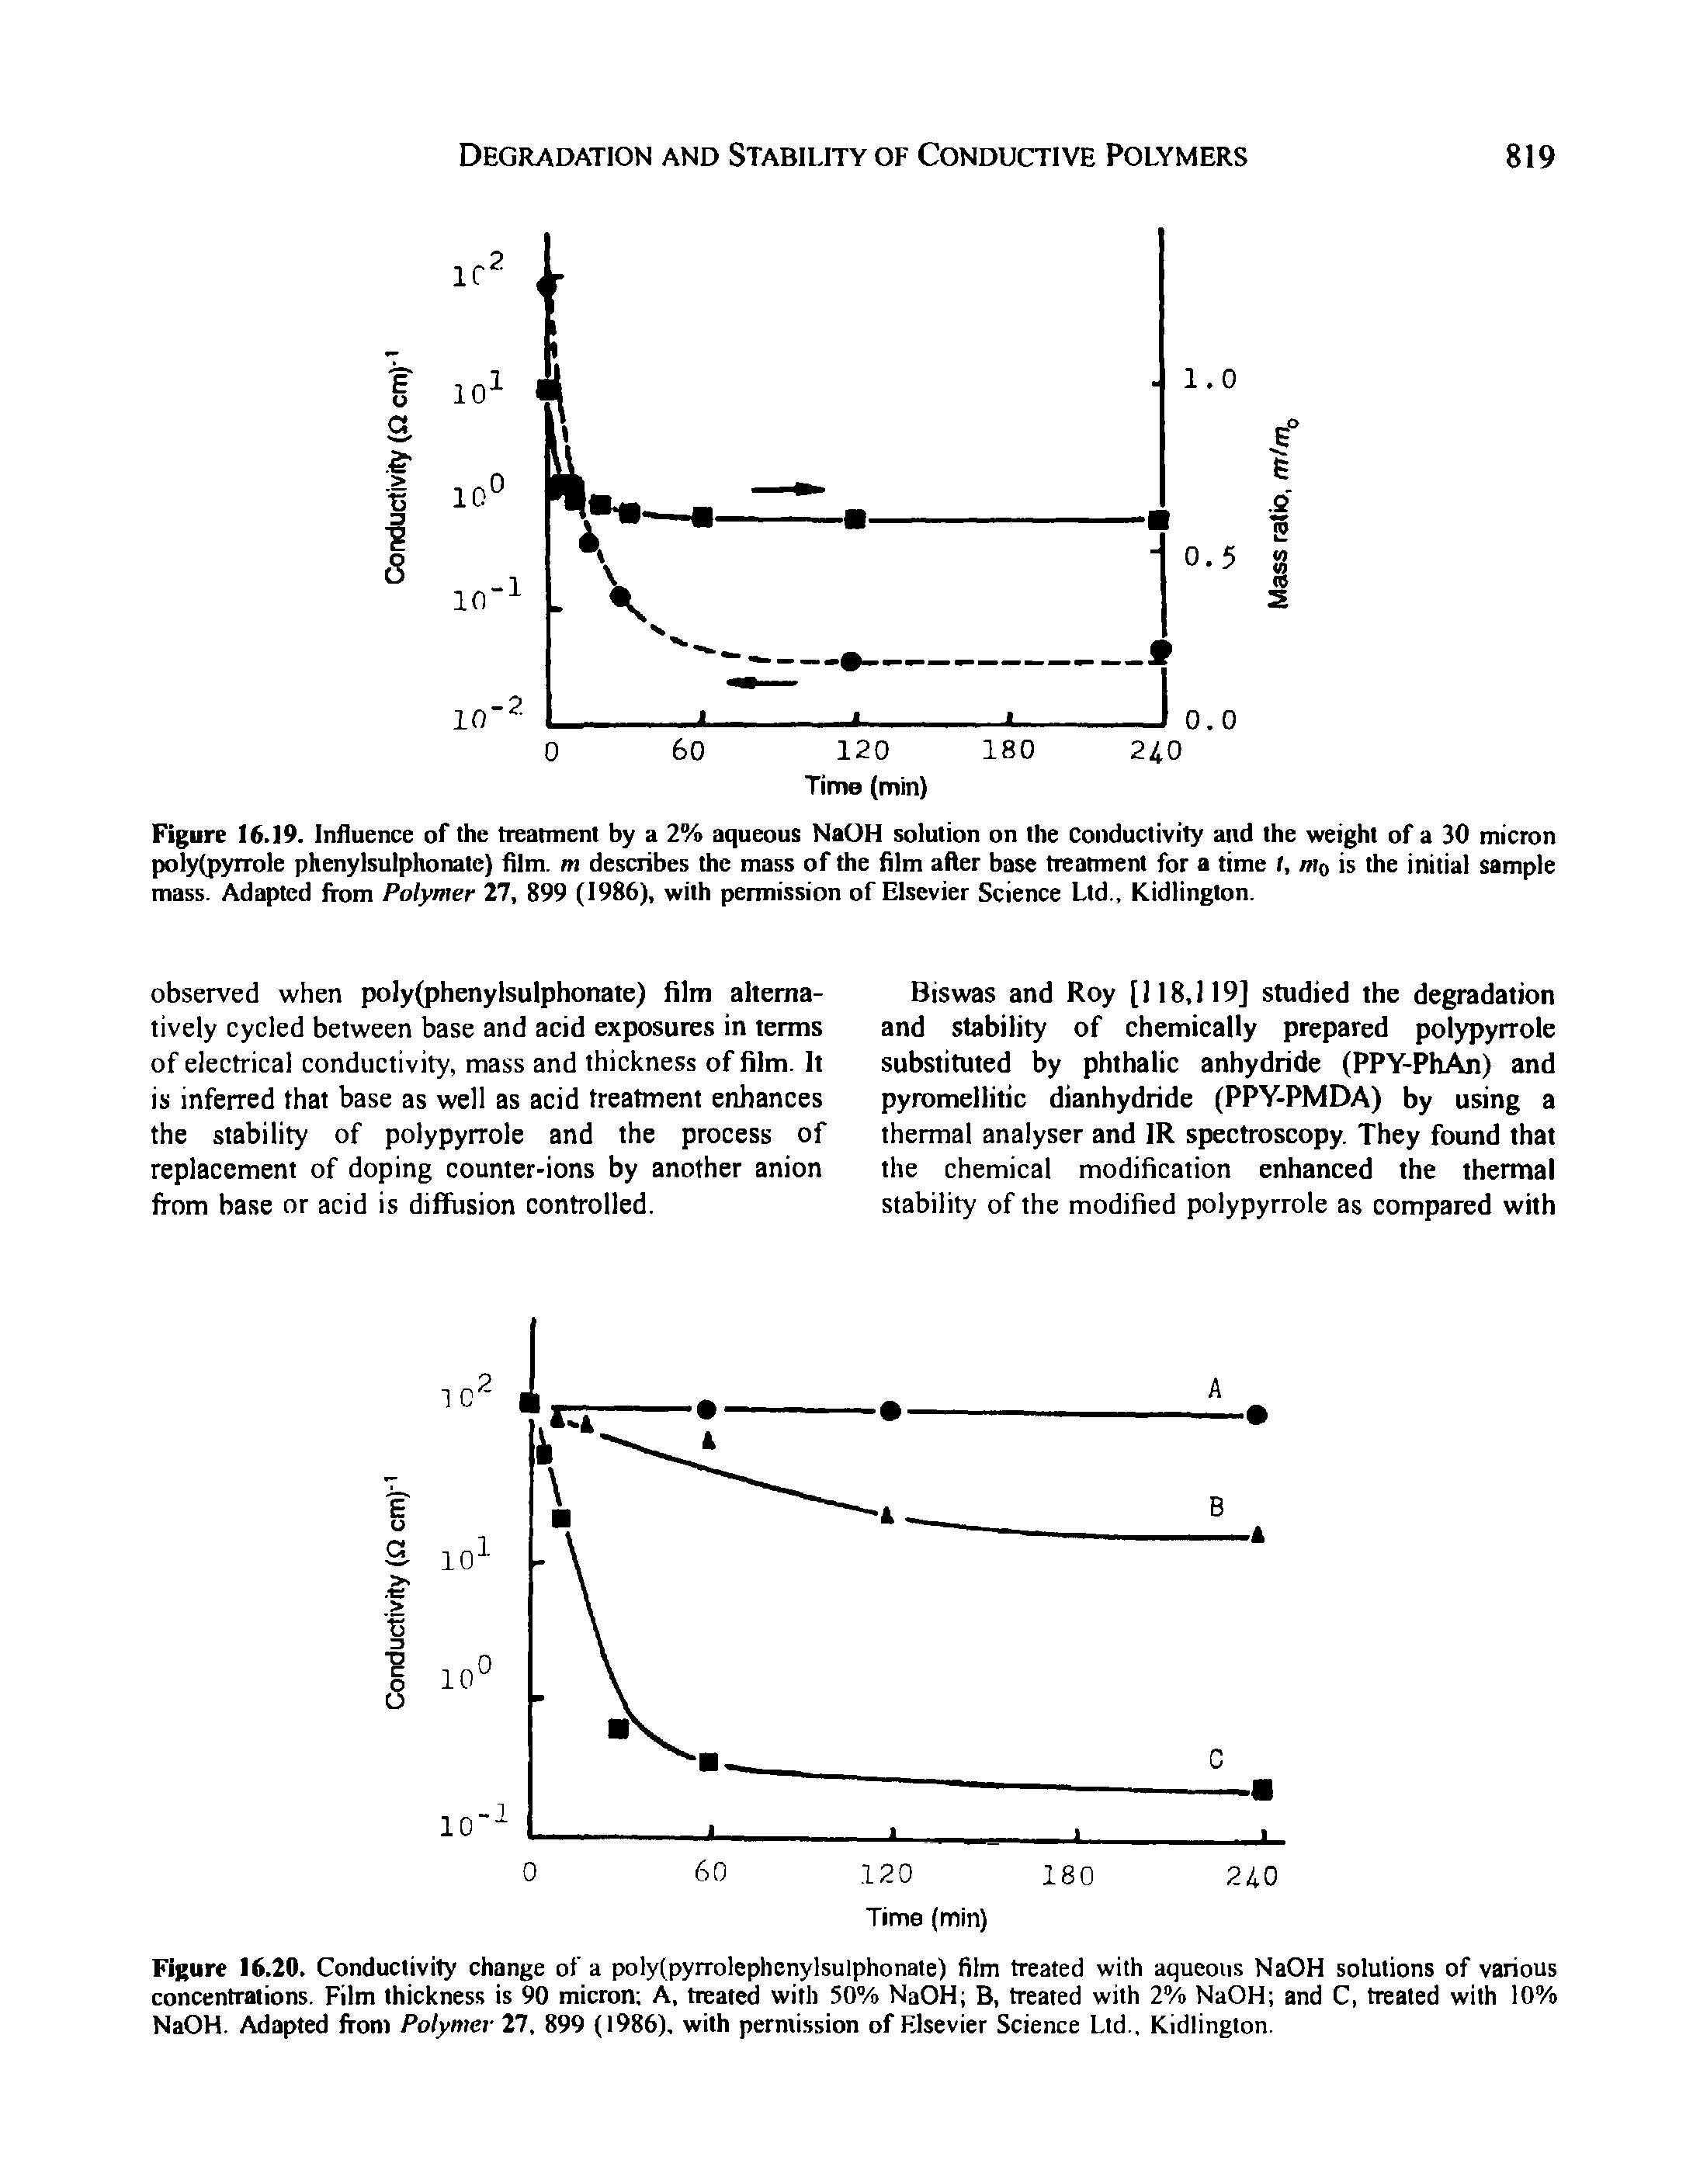 Figure 16.20. Conductivity change of a poly(pyrrolephenylsulphonate) film treated with aqueous NaOH solutions of various concentrations. Film thickness is 90 micron A, treated with 50% NaOH B, treated with 2% NaOH and C, treated with 10% NaOH. Adapted from Polymer 11, 899 (1986), with permission of Elsevier Science Ltd., Kidlington.